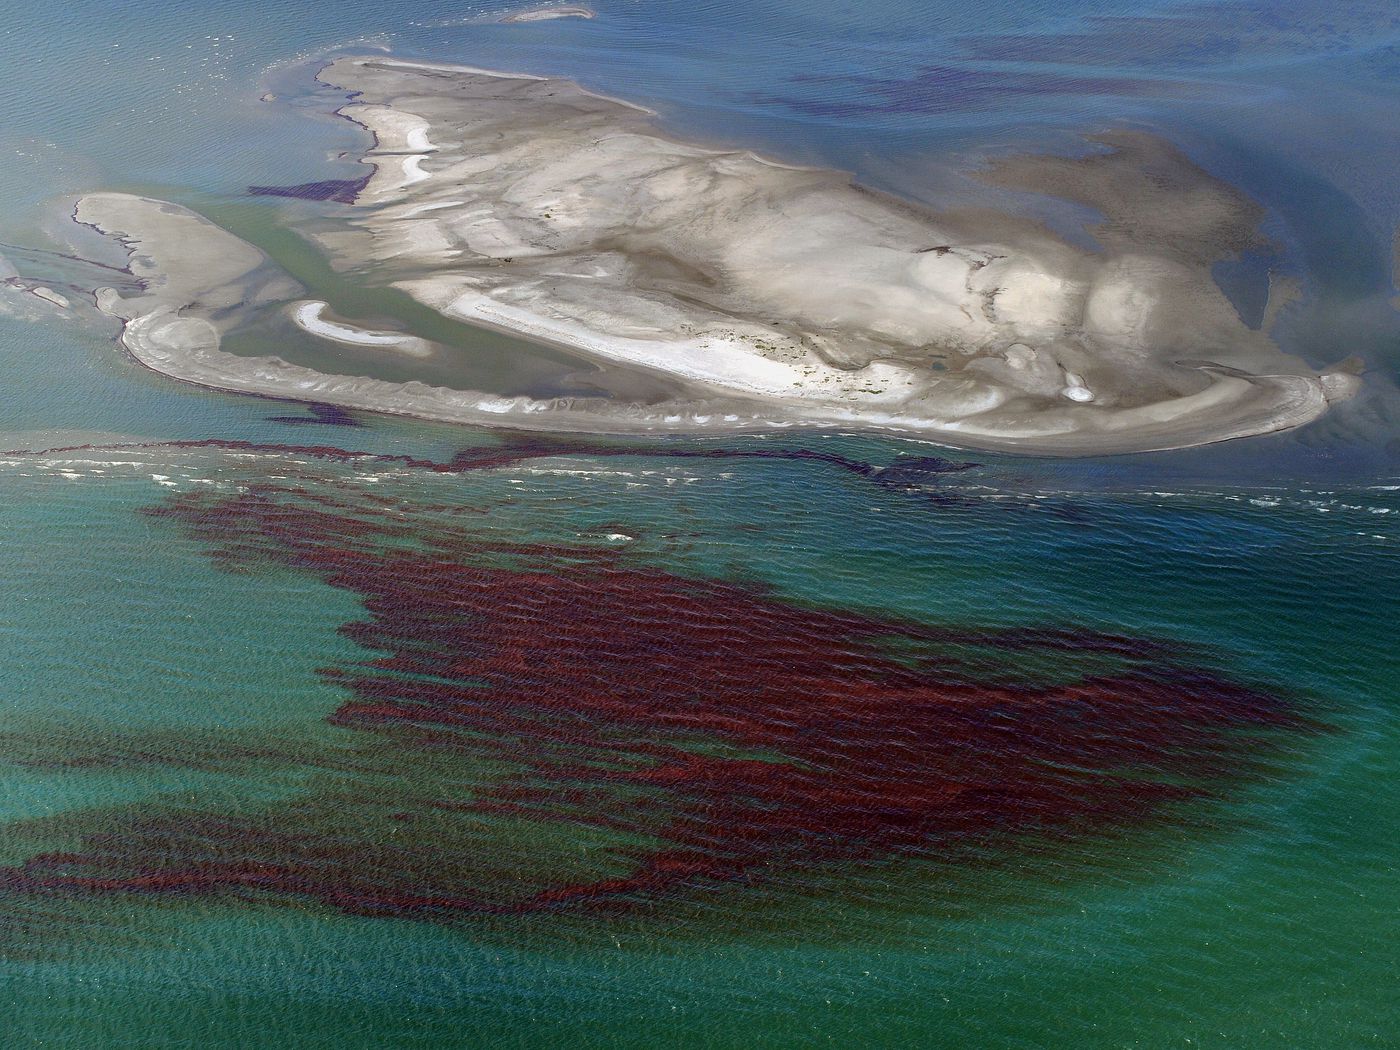 Aerial view of the Deepwater Horizon oil spill at its peak in 2010